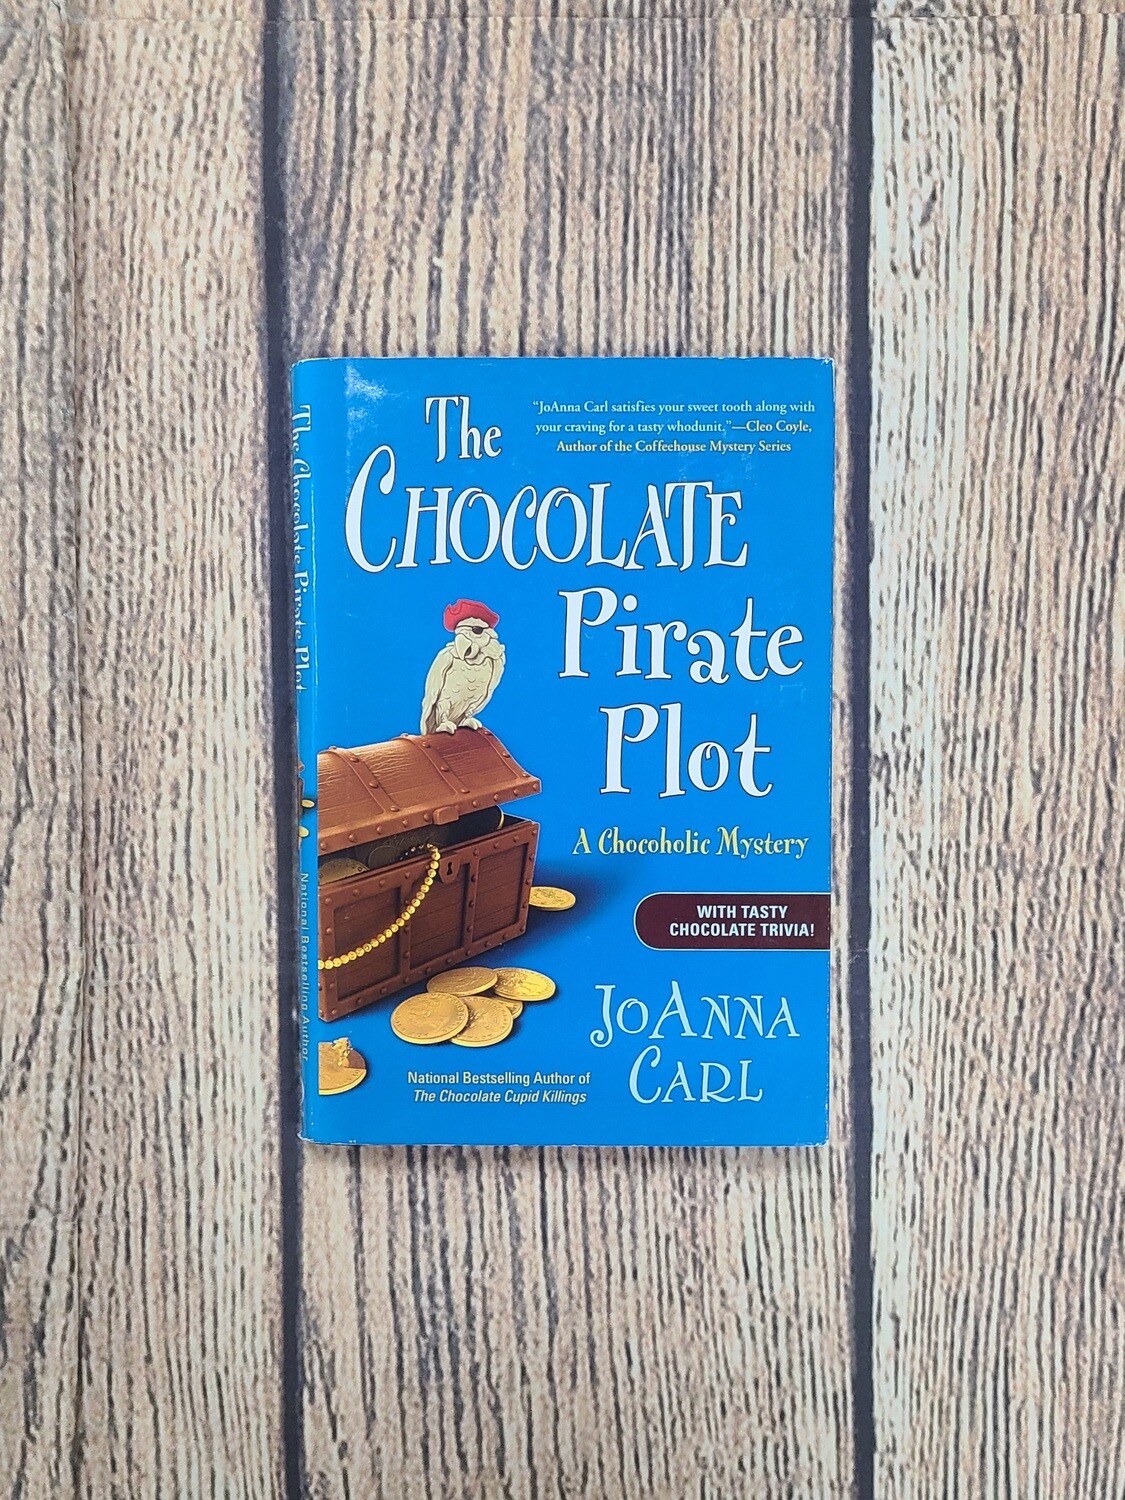 The Chocolate Pirate Plot by JoAnna Carl